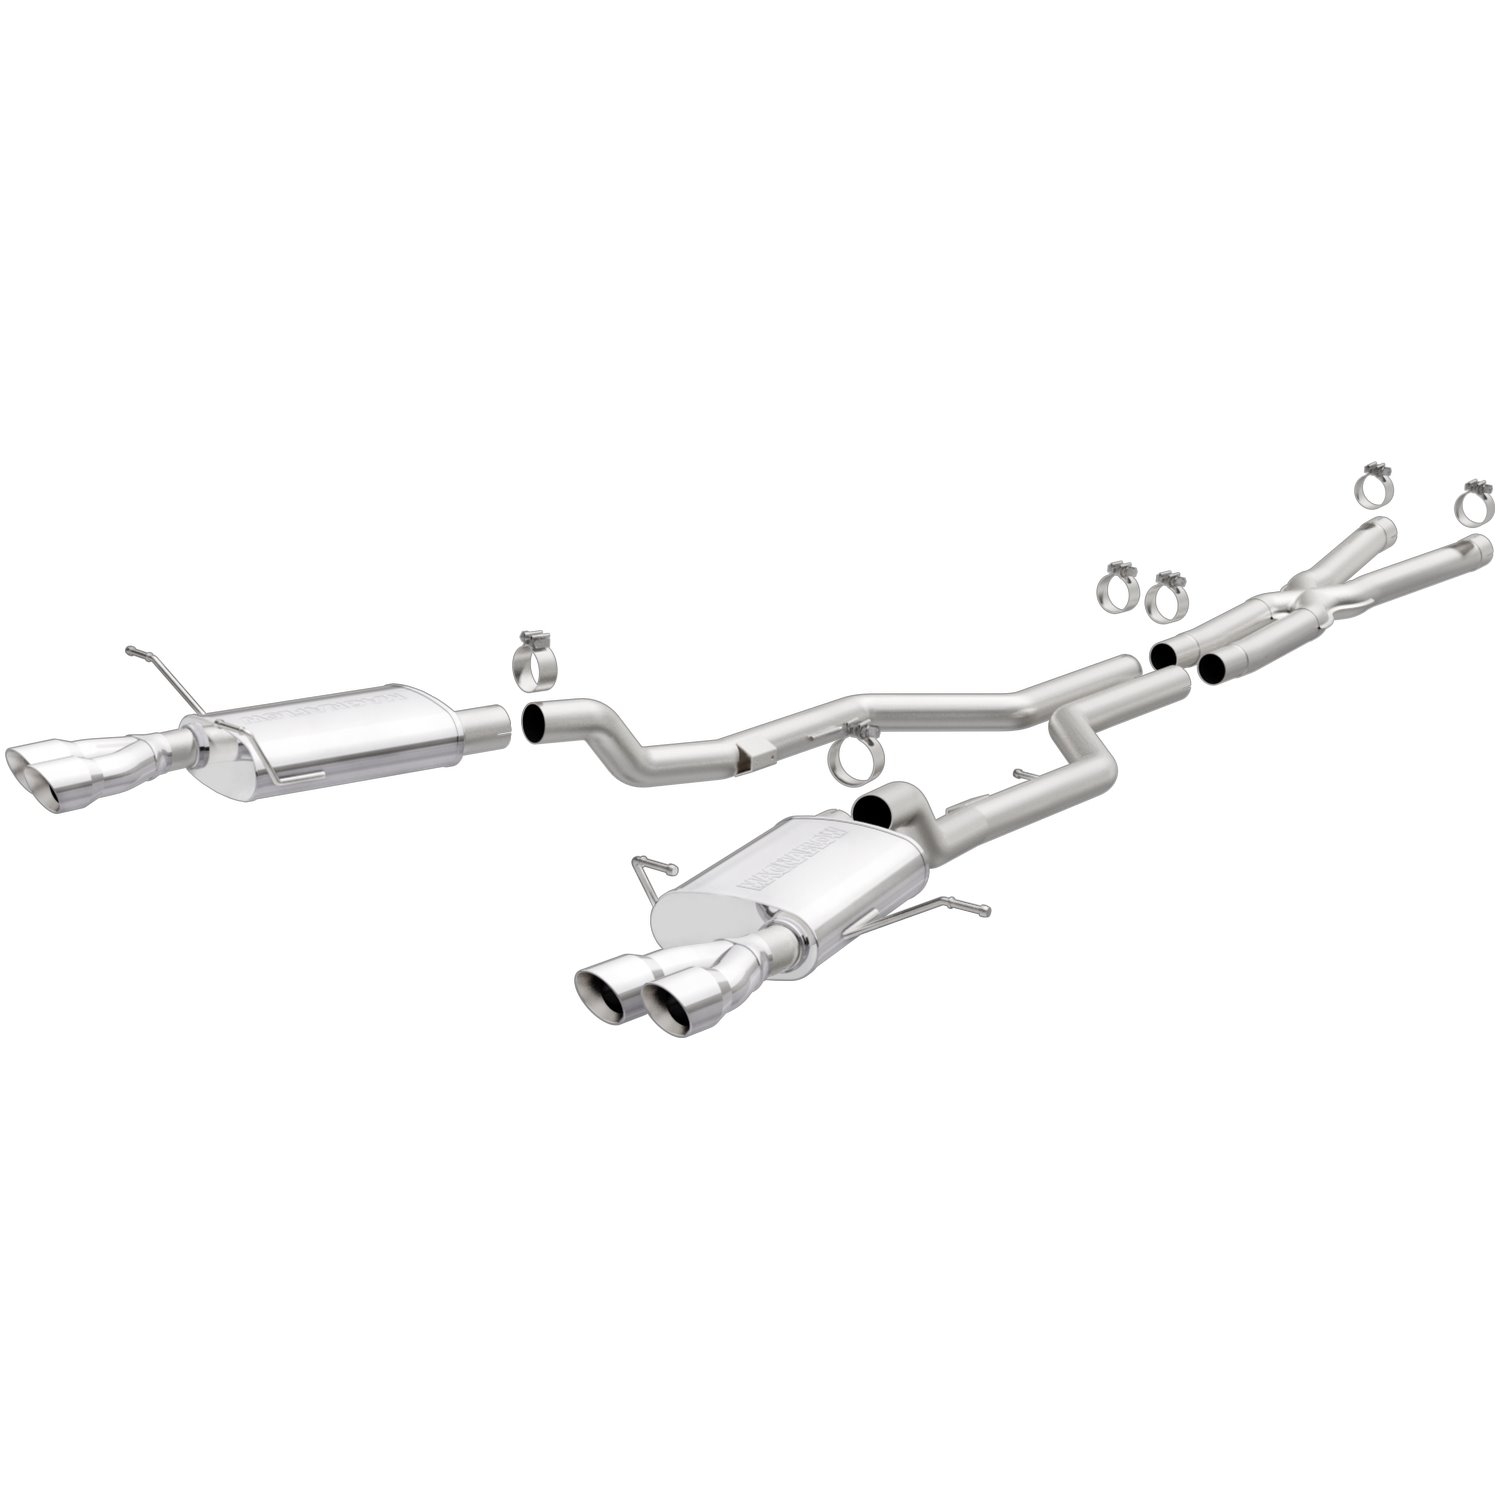 Touring Series Cat-Back Exhaust System 2003-07 Maserati Coupe/Gransport 4.2L V8